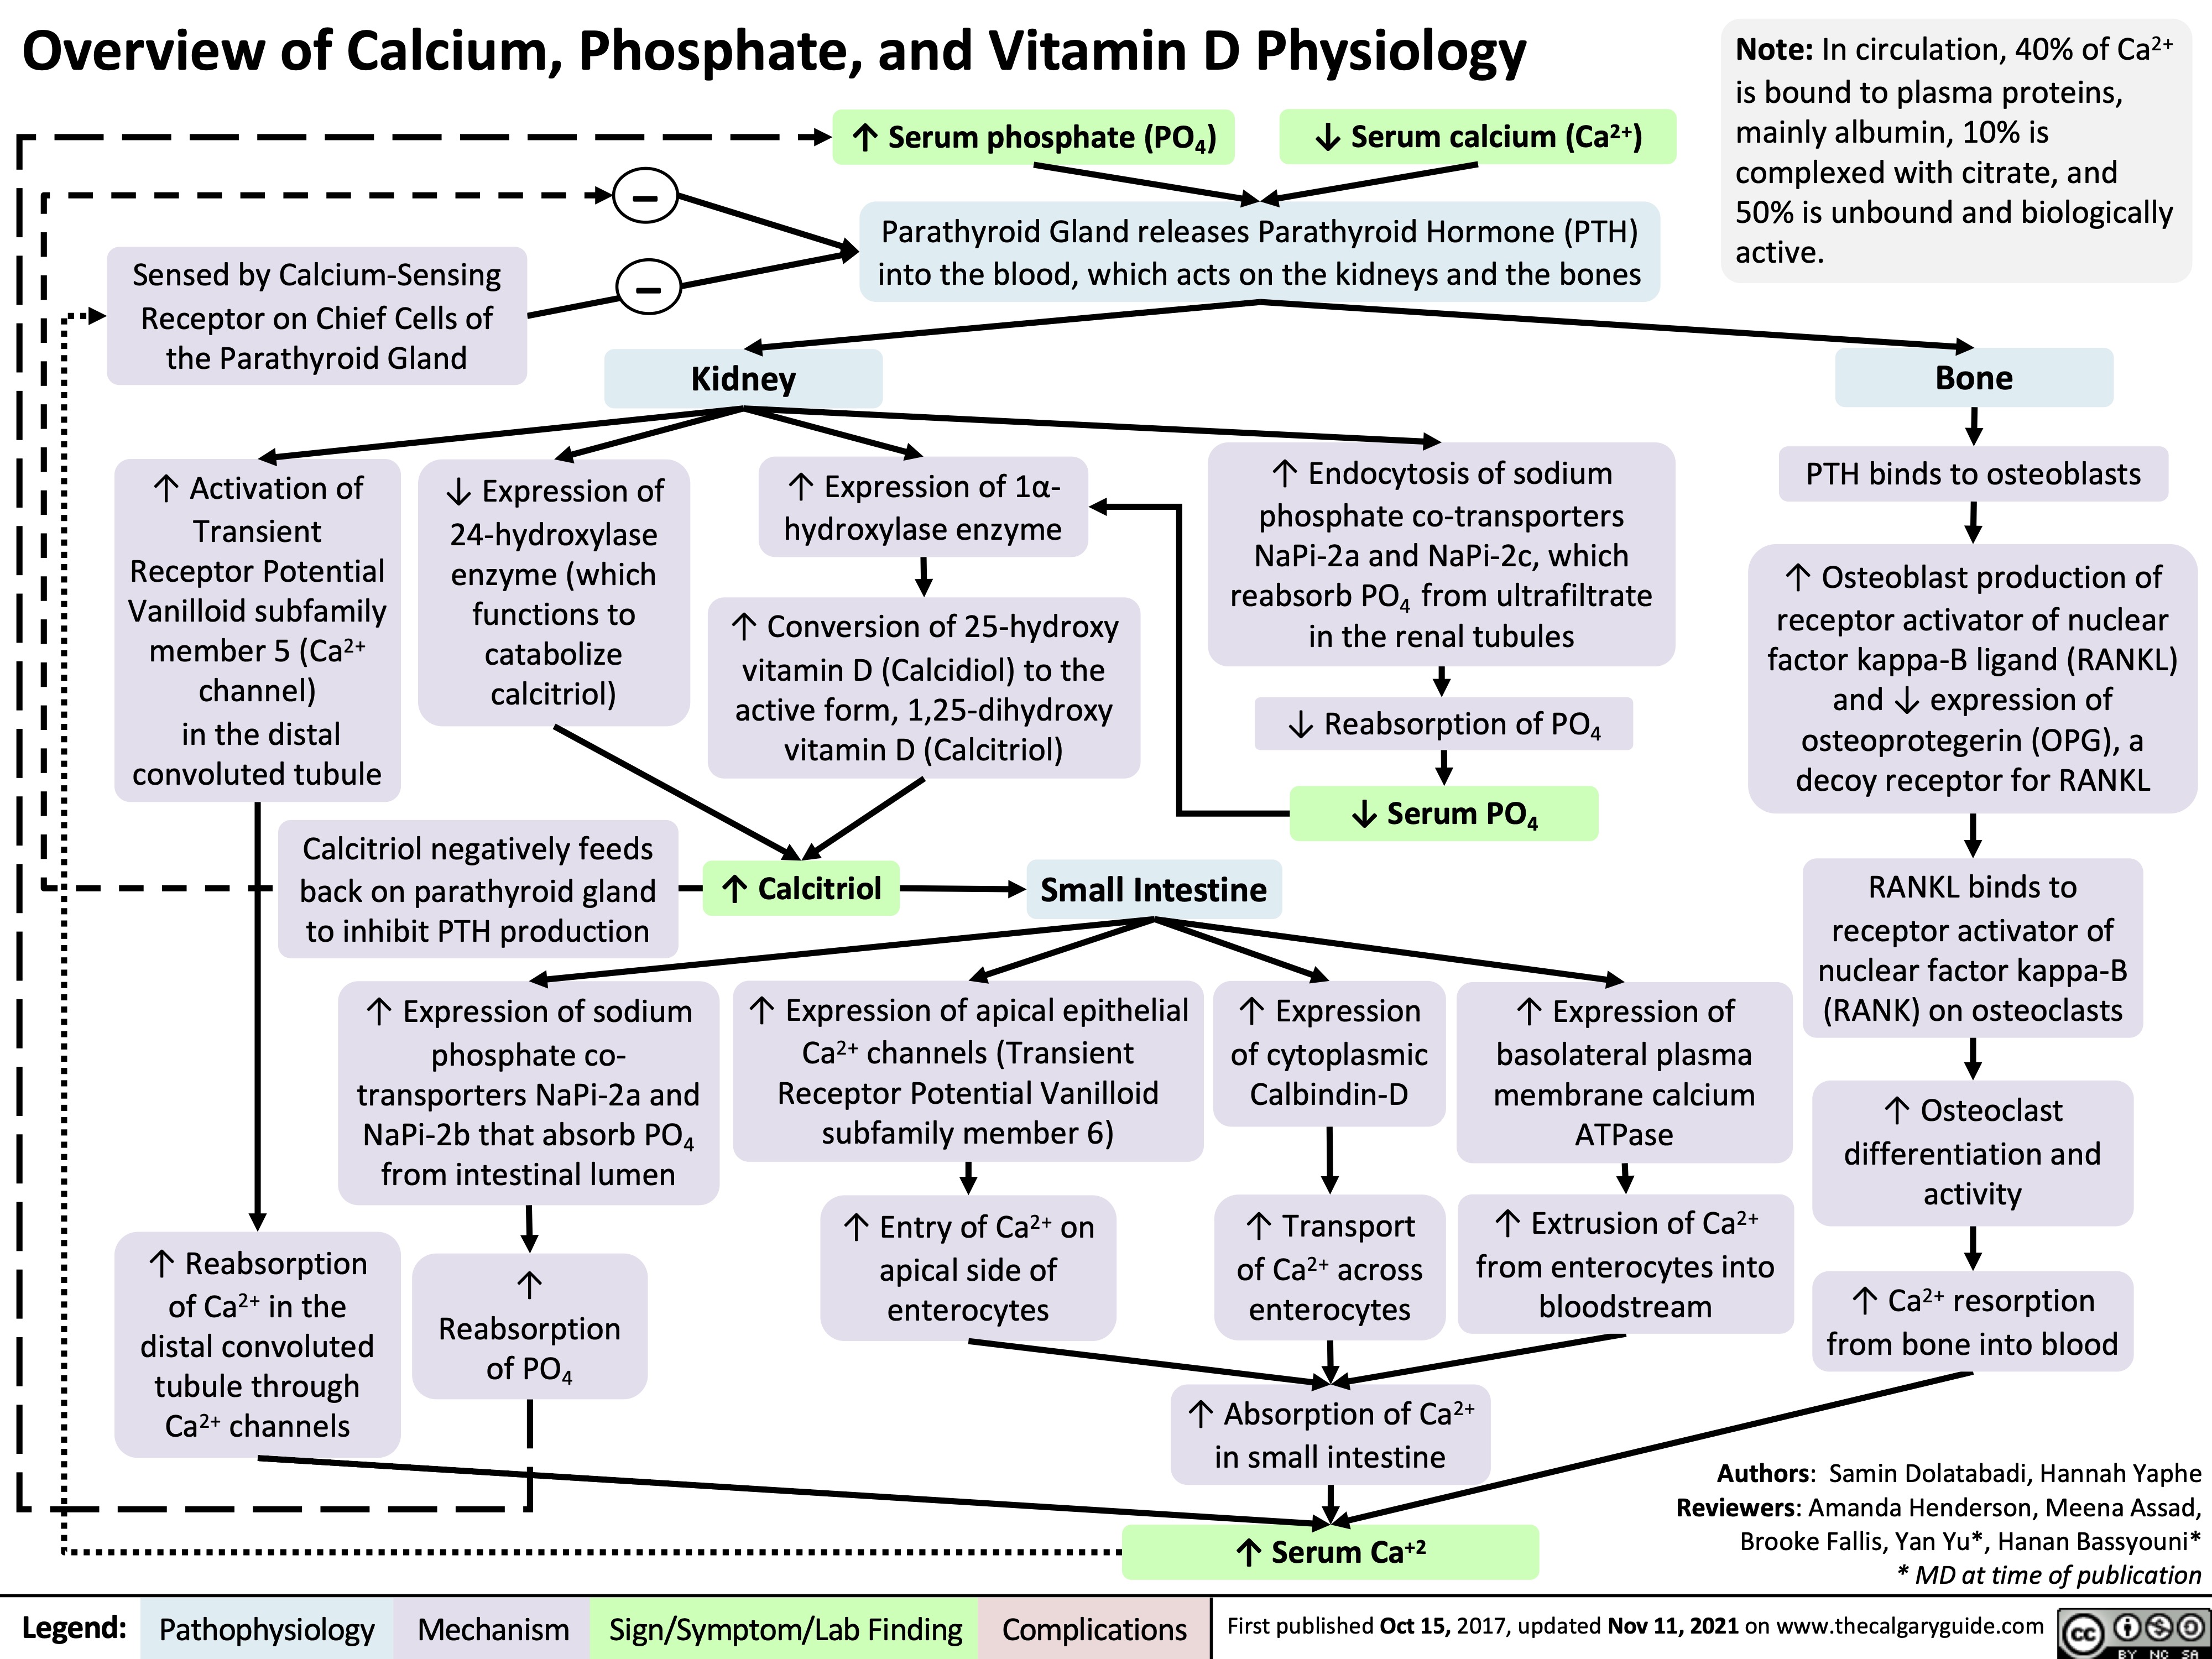 Overview of Calcium, Phosphate, and Vitamin D Physiology
Note: In circulation, 40% of Ca2+ is bound to plasma proteins, mainly albumin, 10% is complexed with citrate, and 50% is unbound and biologically active.
Bone
PTH binds to osteoblasts
↑ Osteoblast production of receptor activator of nuclear factor kappa-B ligand (RANKL) and ↓ expression of osteoprotegerin (OPG), a decoy receptor for RANKL
RANKL binds to receptor activator of nuclear factor kappa-B (RANK) on osteoclasts
↑ Osteoclast differentiation and activity
↑ Ca2+ resorption from bone into blood
           Sensed by Calcium-Sensing Receptor on Chief Cells of the Parathyroid Gland
− −
↑ Serum phosphate (PO4) ↓ Serum calcium (Ca2+)
Parathyroid Gland releases Parathyroid Hormone (PTH) into the blood, which acts on the kidneys and the bones
     Kidney
      ↑ Activation of Transient Receptor Potential Vanilloid subfamily member 5 (Ca2+ channel)
in the distal convoluted tubule
↓ Expression of 24-hydroxylase enzyme (which functions to catabolize calcitriol)
↑ Expression of 1α- hydroxylase enzyme
↑ Conversion of 25-hydroxy vitamin D (Calcidiol) to the
active form, 1,25-dihydroxy vitamin D (Calcitriol)
↑ Calcitriol       Small Intestine
↑ Endocytosis of sodium phosphate co-transporters NaPi-2a and NaPi-2c, which reabsorb PO4 from ultrafiltrate in the renal tubules
↓ Reabsorption of PO 4
↓ Serum PO
            Calcitriol negatively feeds back on parathyroid gland to inhibit PTH production
↑ Expression of sodium phosphate co- transporters NaPi-2a and NaPi-2b that absorb PO4 from intestinal lumen
4
       ↑ Expression of apical epithelial Ca2+ channels (Transient Receptor Potential Vanilloid subfamily member 6)
↑ Entry of Ca2+ on apical side of enterocytes
     ↑ Reabsorption of Ca2+ in the distal convoluted tubule through Ca2+ channels
↑ Reabsorption of PO
↑ Expression of cytoplasmic Calbindin-D
↑ Transport of Ca2+ across enterocytes
↑ Absorption of Ca2+ in small intestine
↑ Serum Ca+2
↑ Expression of basolateral plasma membrane calcium ATPase
↑ Extrusion of Ca2+ from enterocytes into bloodstream
    4
   Authors: Samin Dolatabadi, Hannah Yaphe Reviewers: Amanda Henderson, Meena Assad, Brooke Fallis, Yan Yu*, Hanan Bassyouni* * MD at time of publication
  Legend:
 Pathophysiology
 Mechanism
Sign/Symptom/Lab Finding
 Complications
 First published Oct 15, 2017, updated Nov 11, 2021 on www.thecalgaryguide.com
  